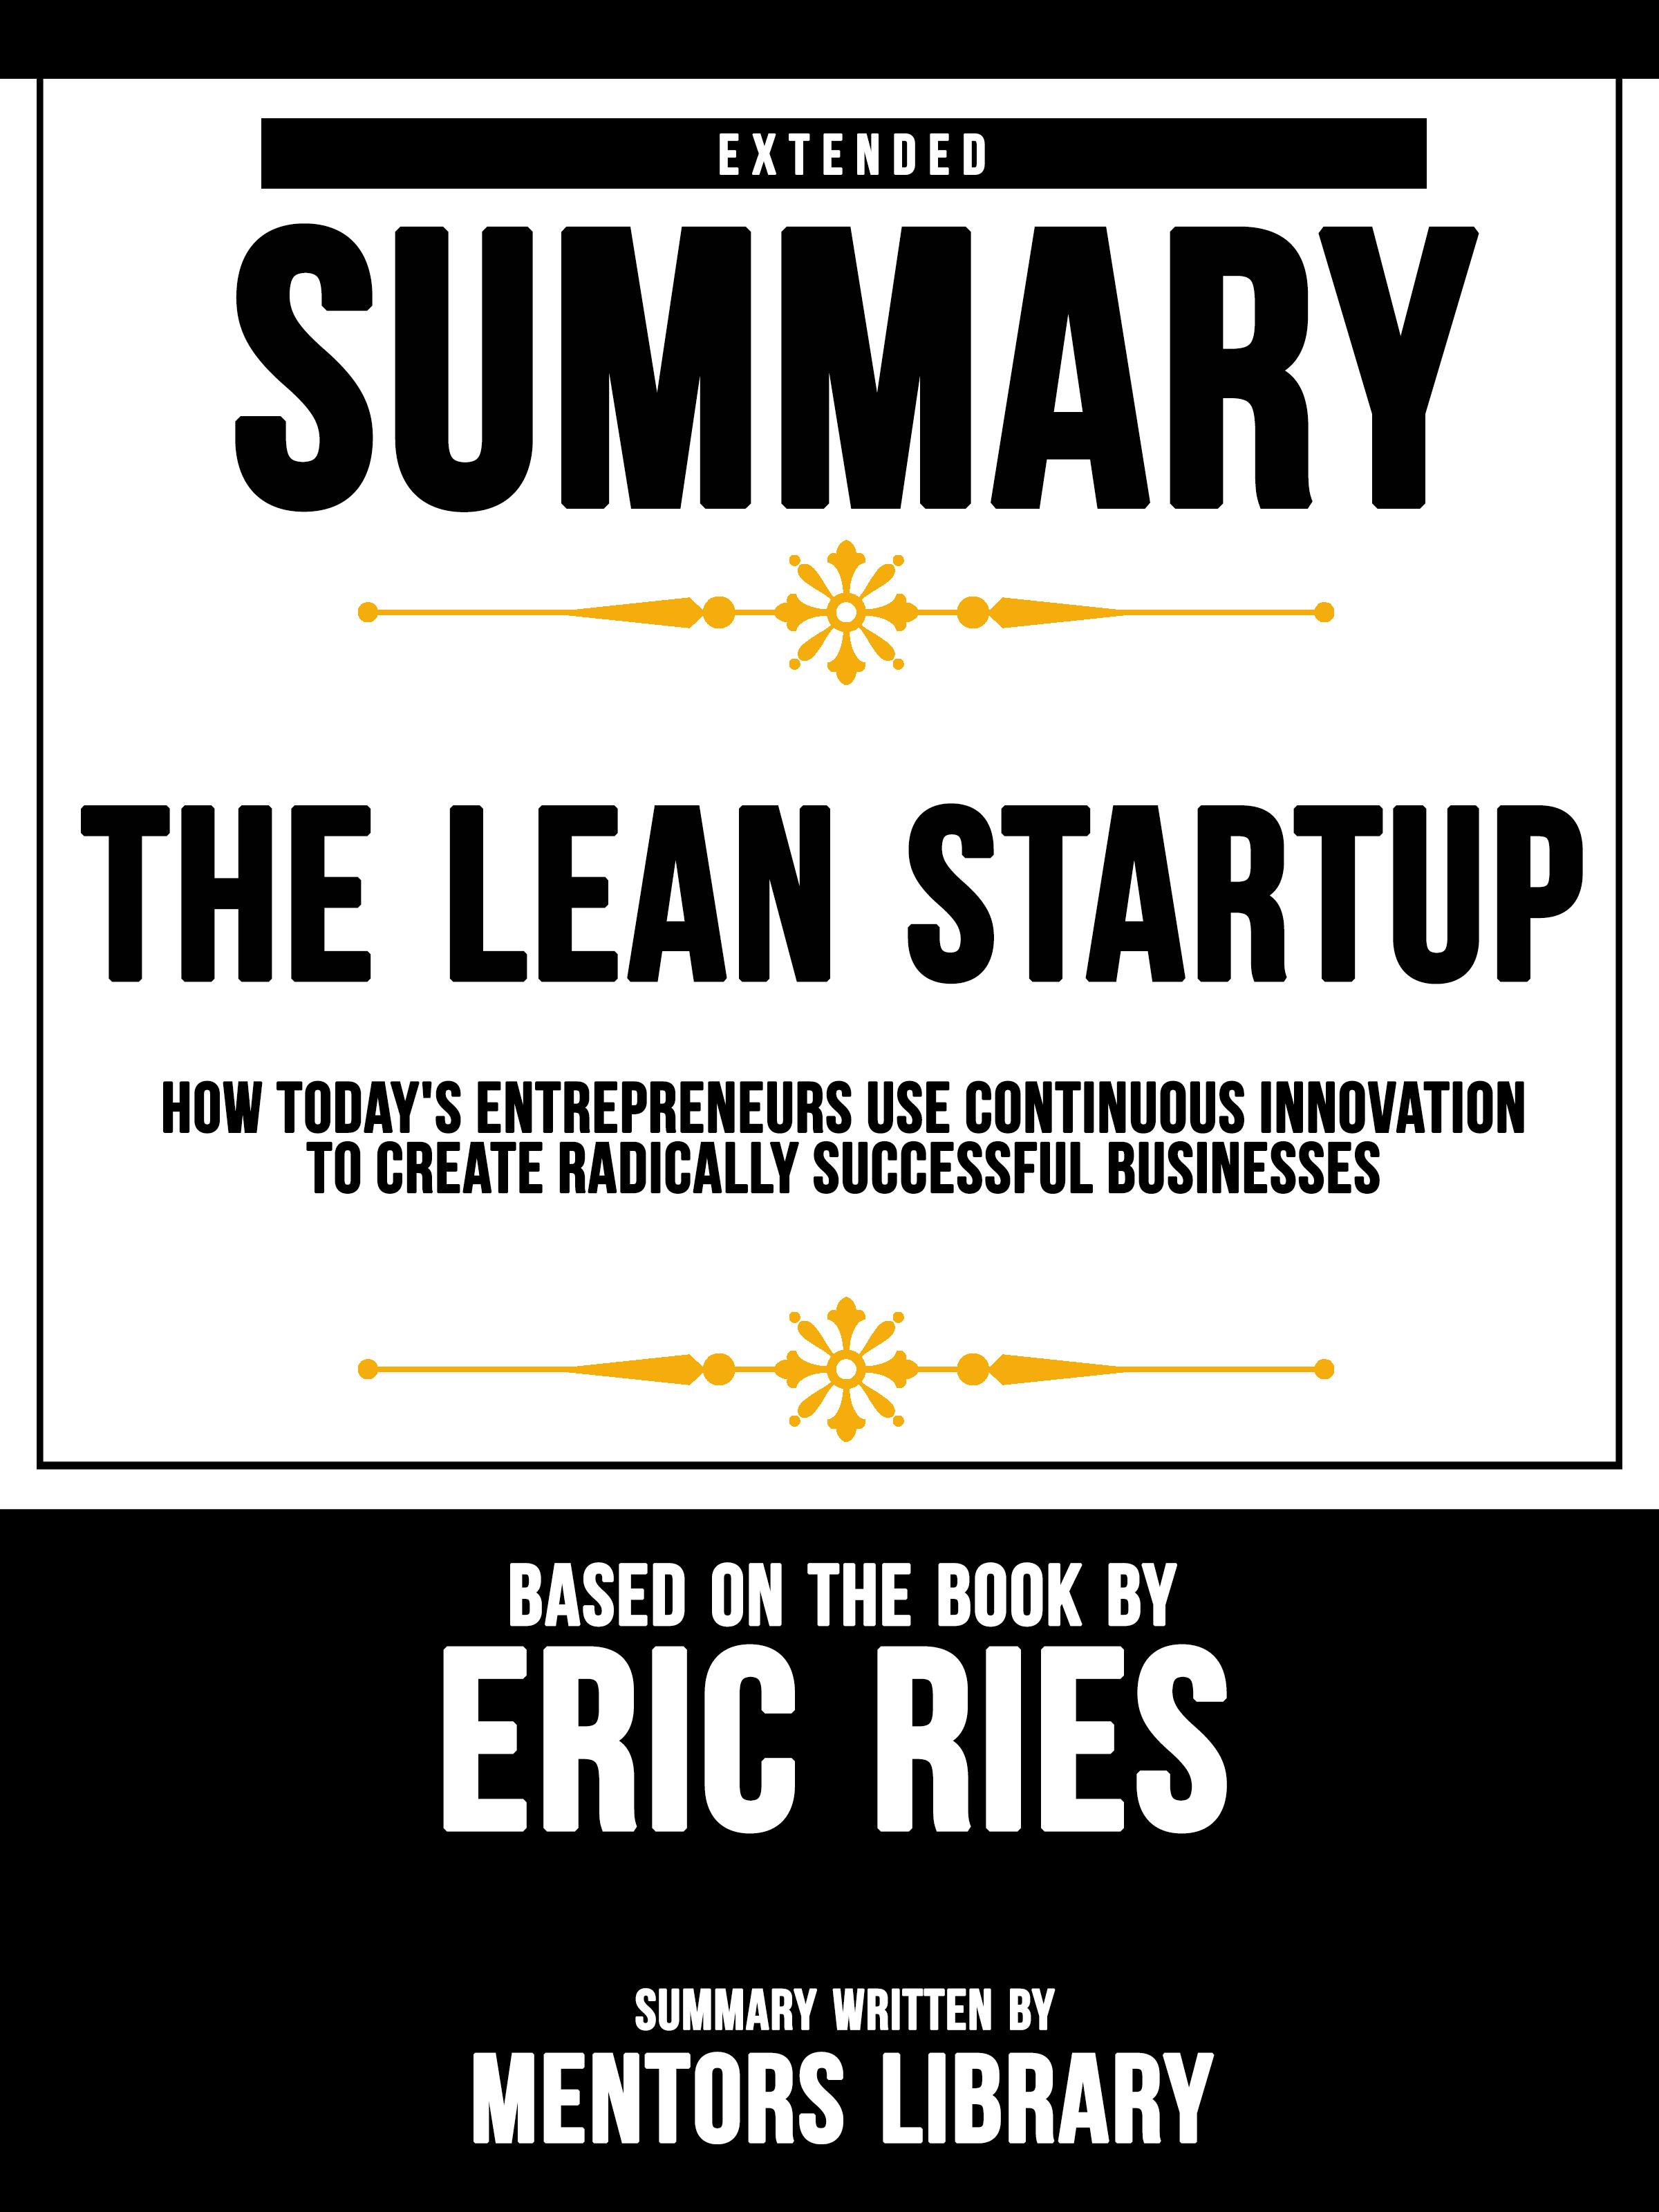 Extended Summary Of The Lean Startup: How Today's Entrepreneurs Use Continuous Innovation To Create Radically Successful Businesses - Based On The Book By Eric Ries - undefined